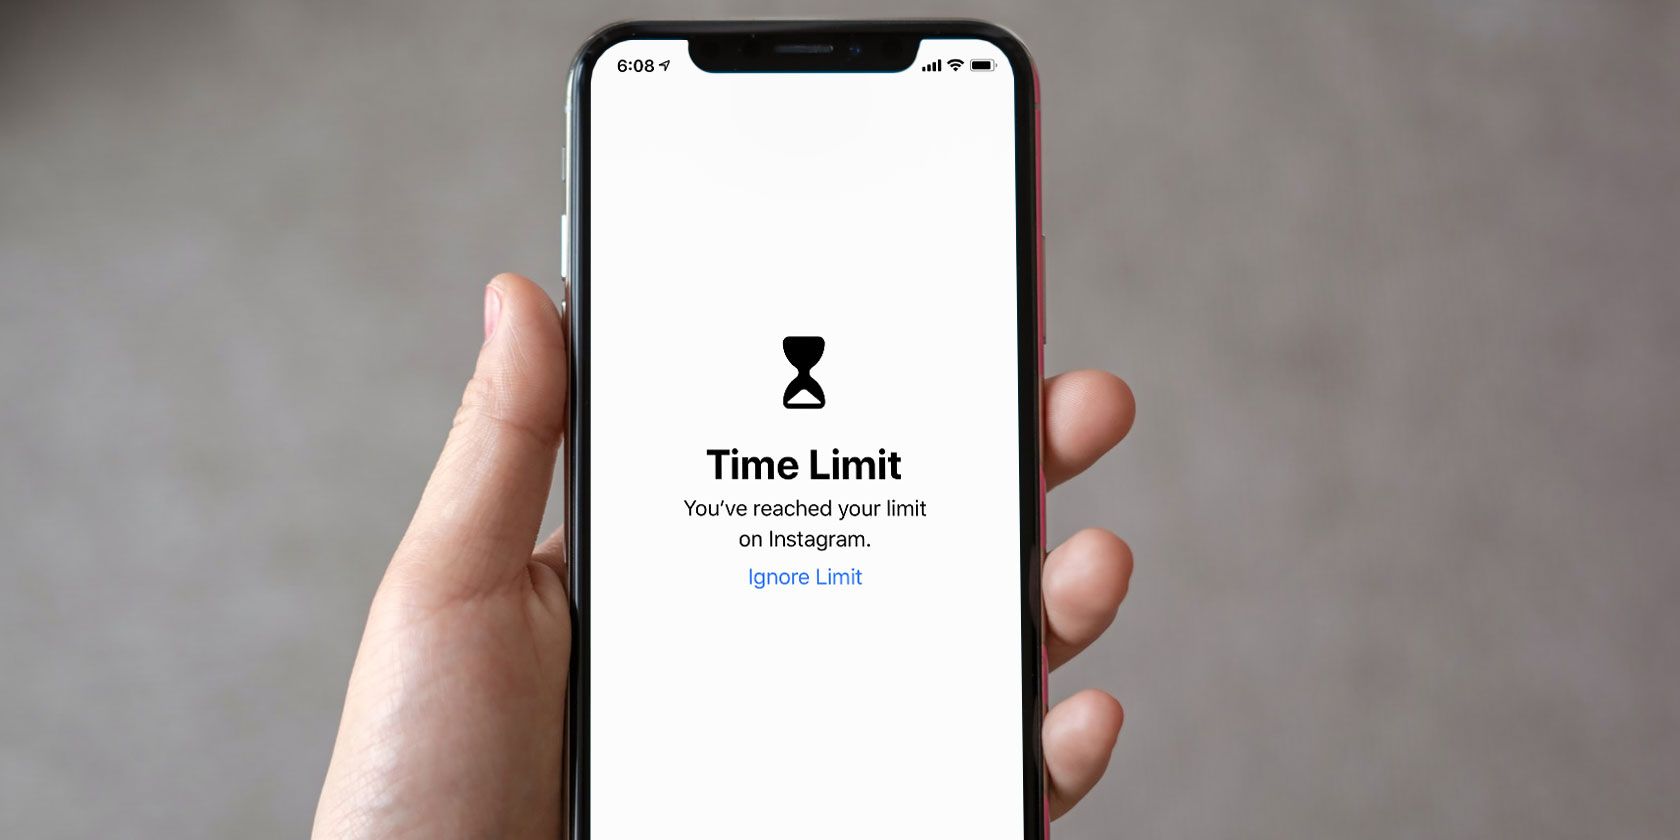 Screen Time limit screen in iOS